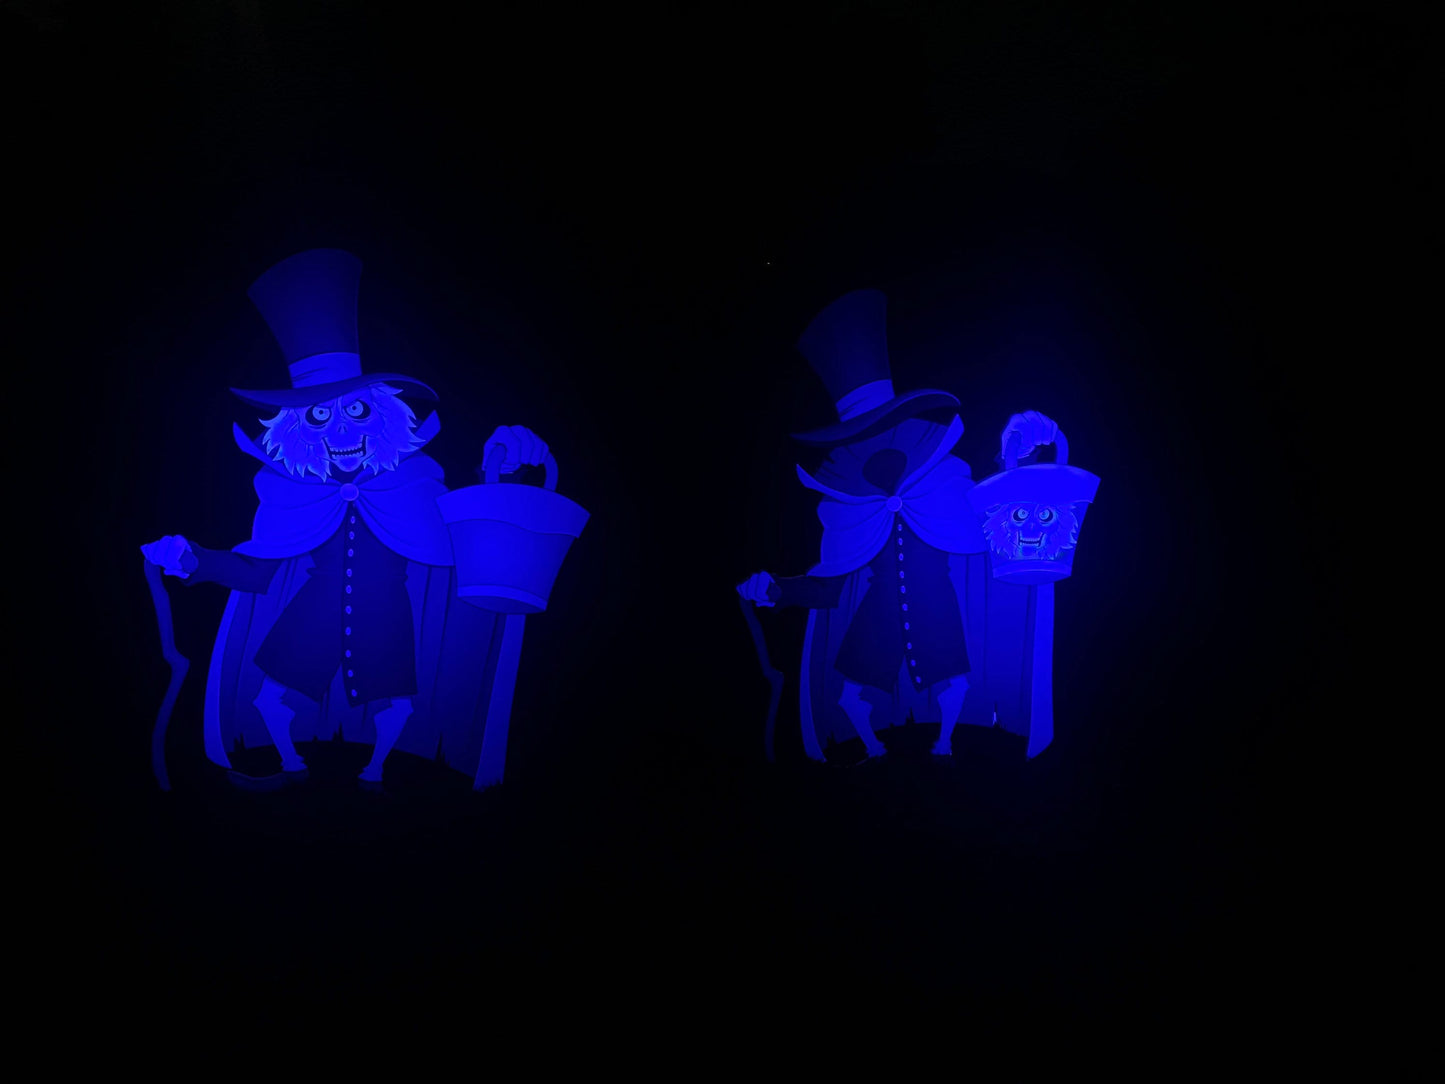 Haunted Mansion ghost bride and Hatbox Ghost Yard display cutouts